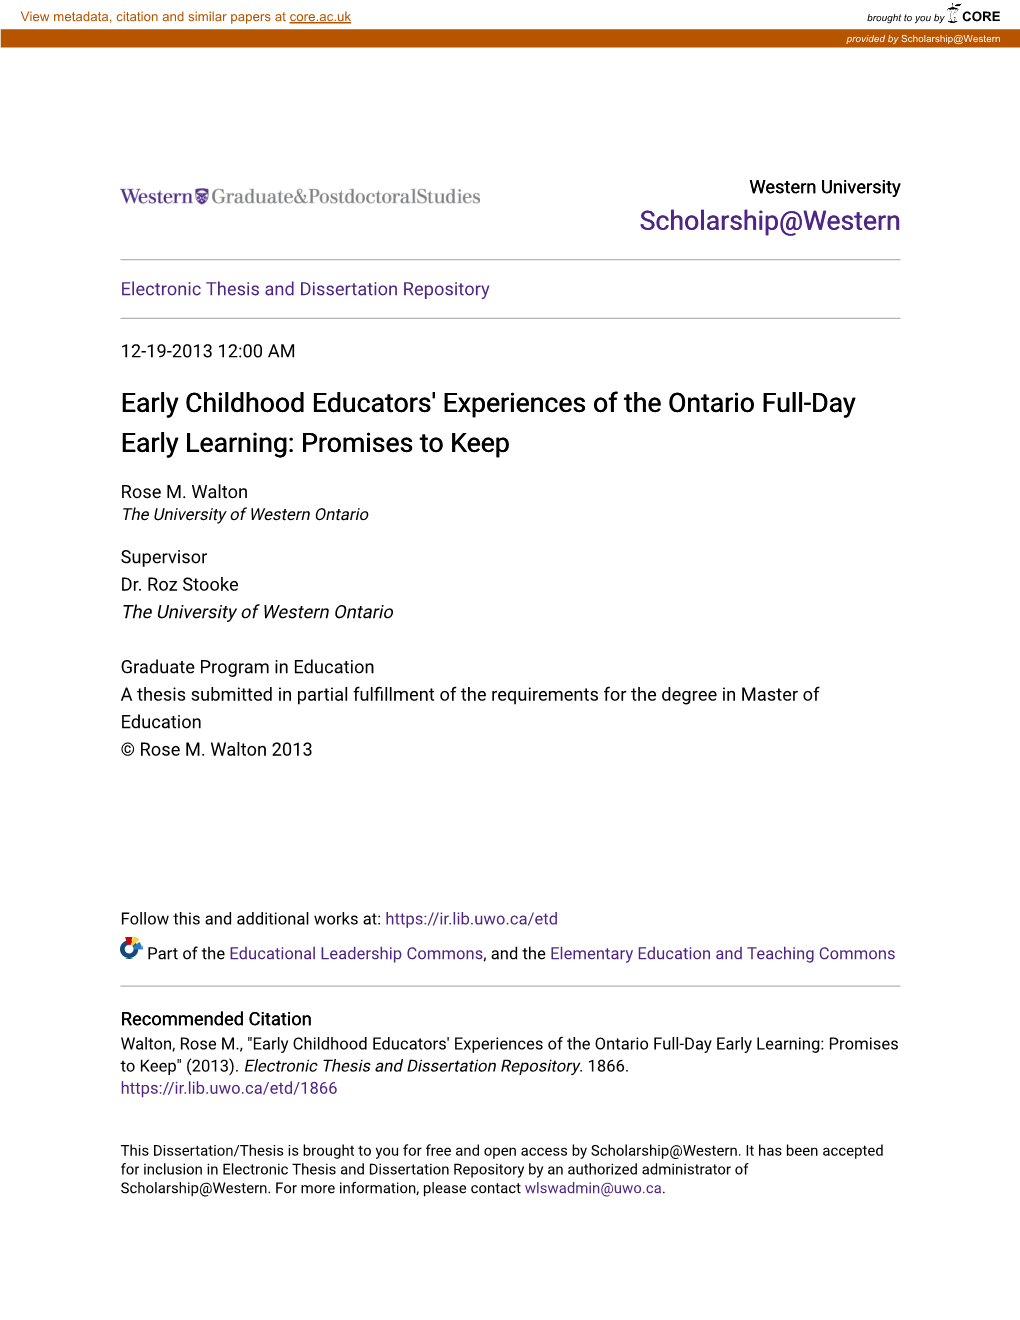 Early Childhood Educators' Experiences of the Ontario Full-Day Early Learning: Promises to Keep